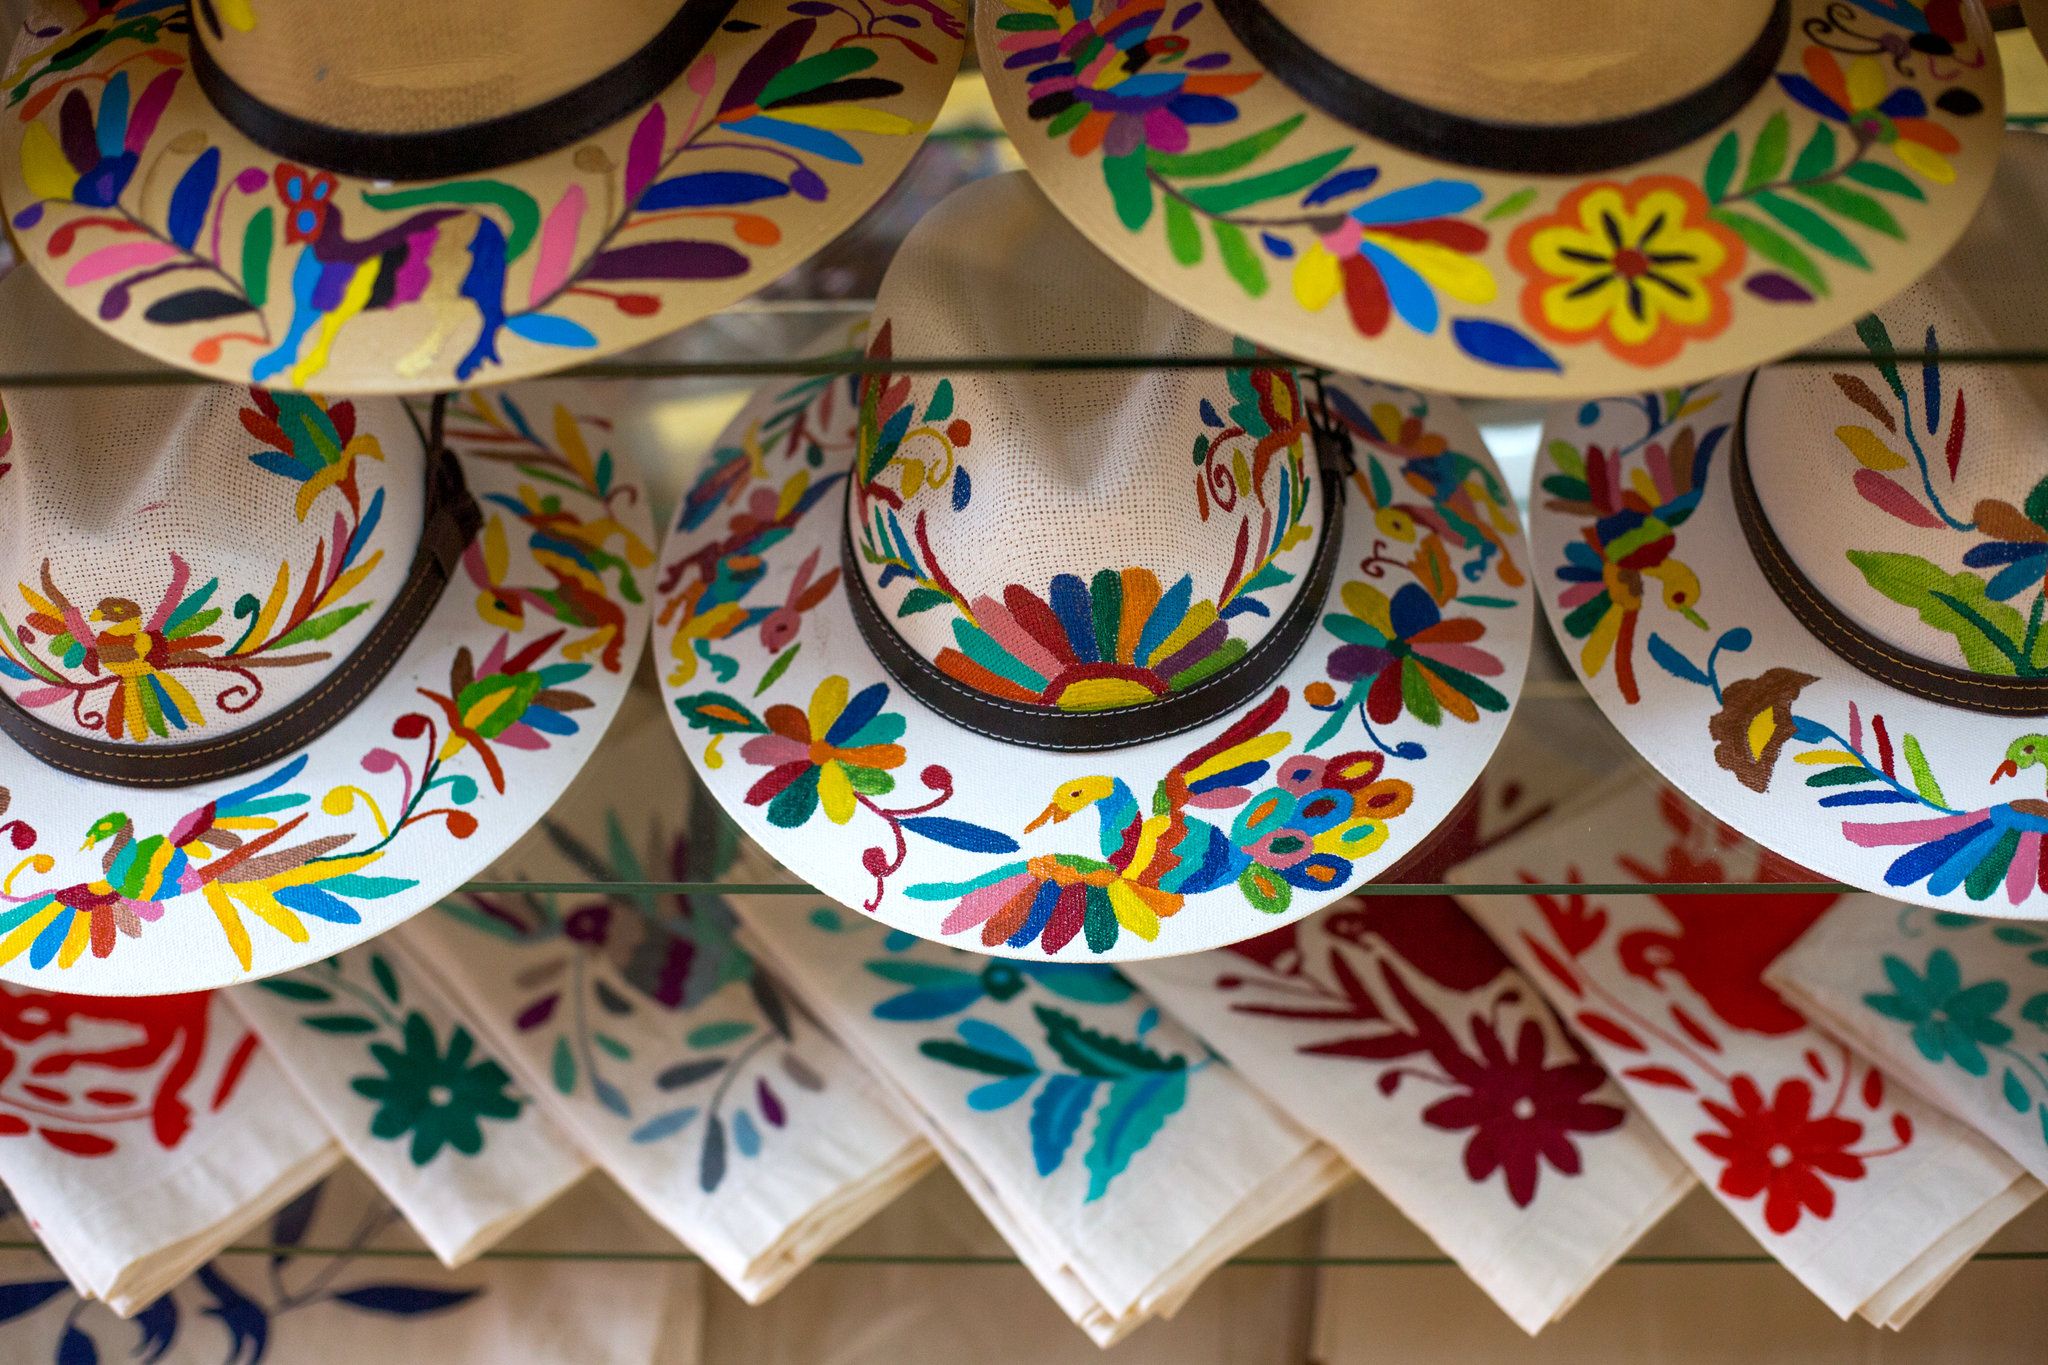 This Mexican Village's Embroidery Designs Are Admired (and Appropriated) Globally